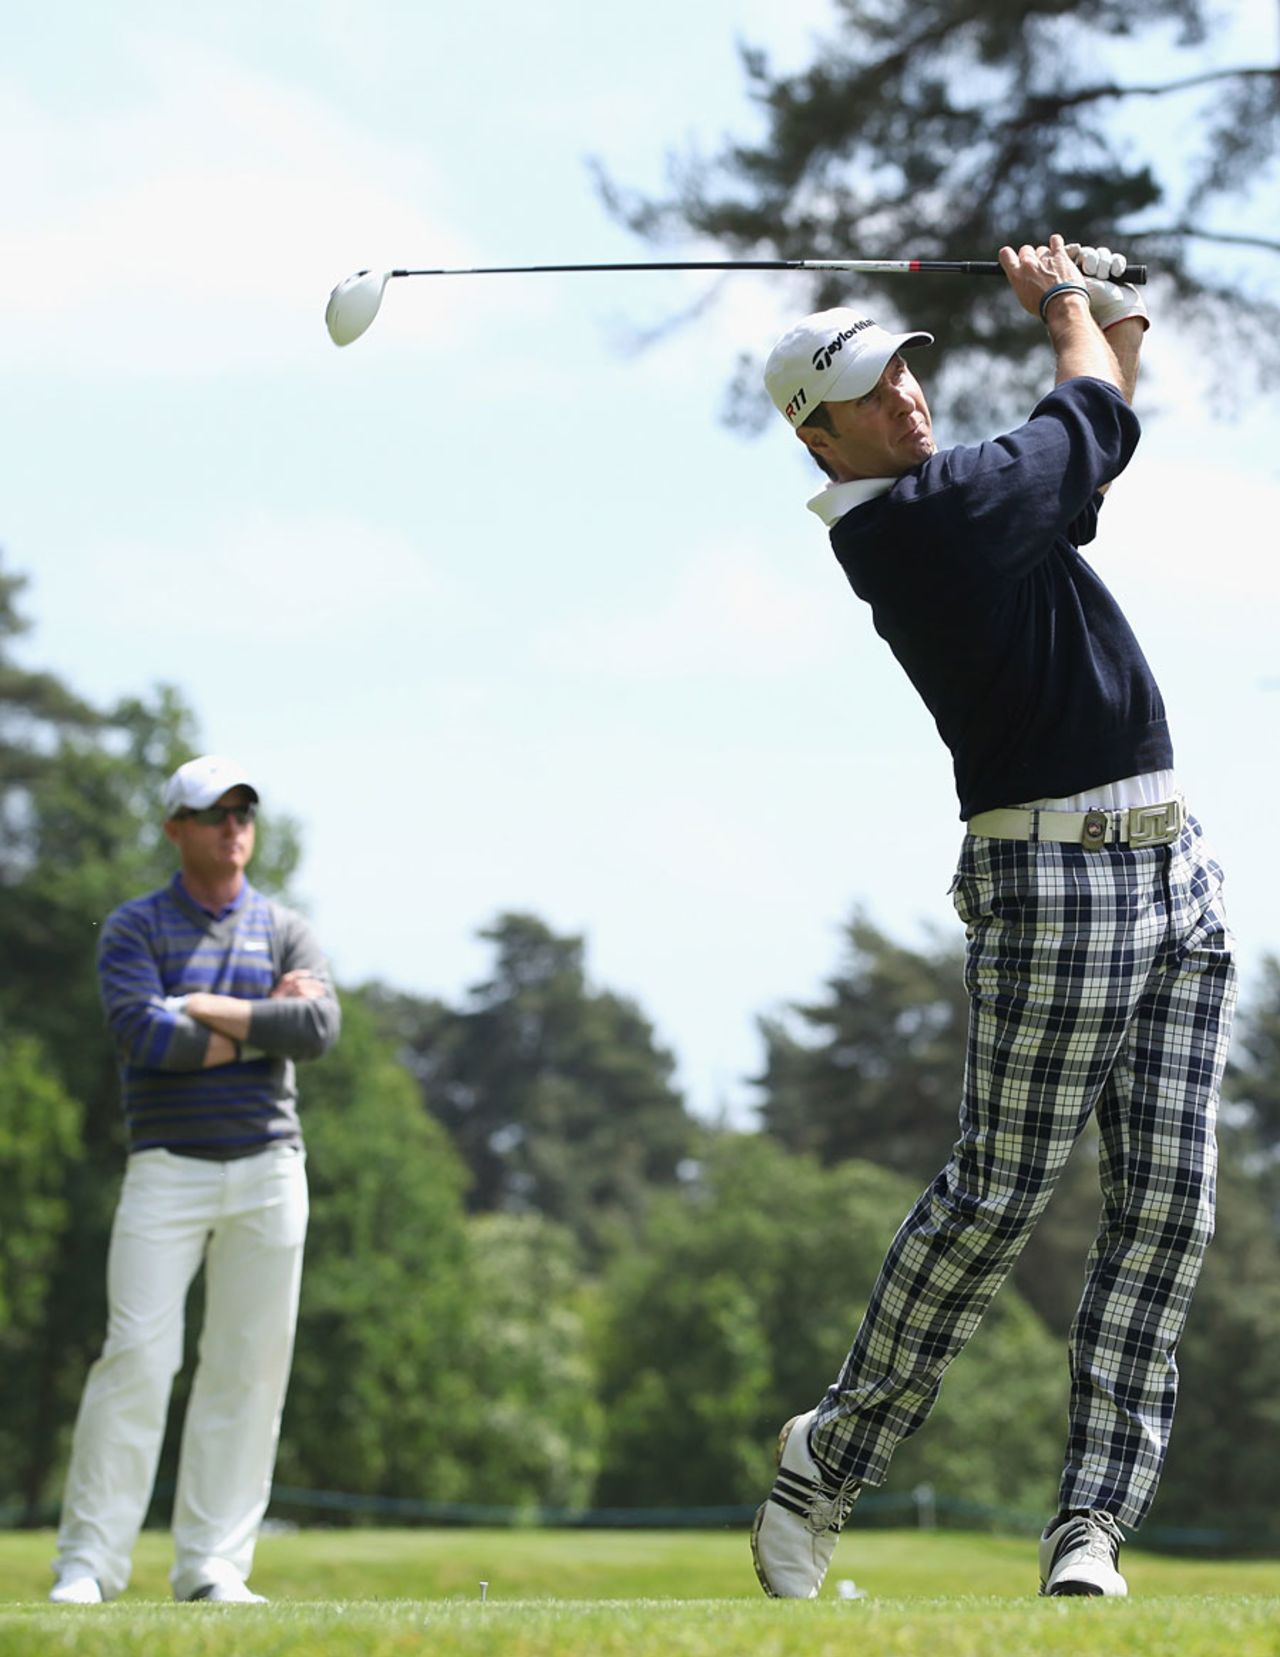 Michael Vaughan drives during the 'Ole Seve' Pro-Am in aid of the Seve Ballesteros Foundation, Wentworth Club, May 23 2011